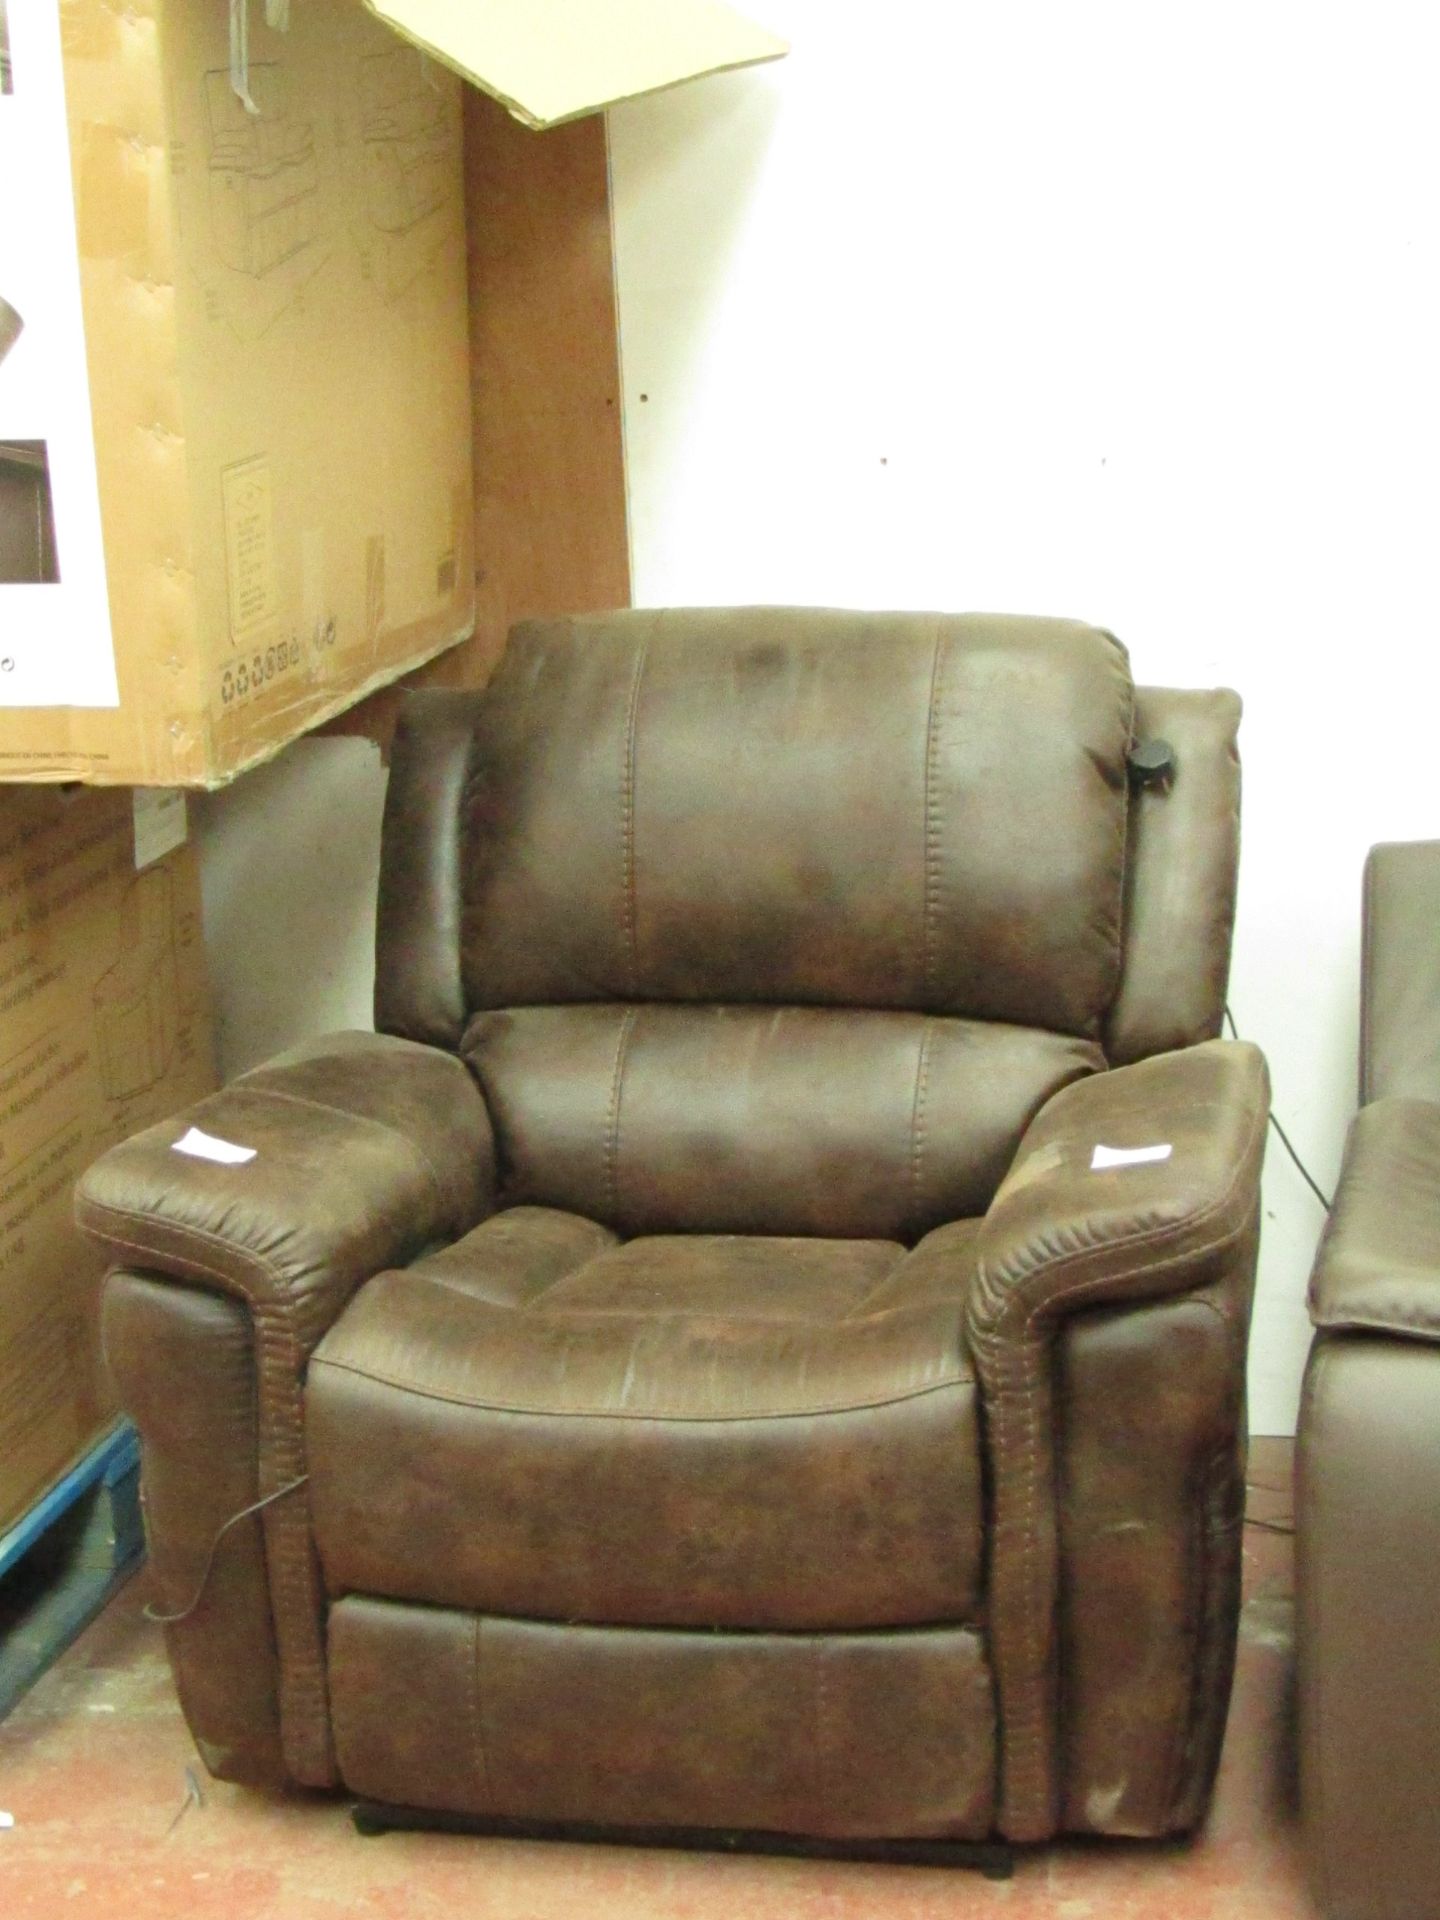 Polaski Fabric Power reclining armchair with heat and massage, tested working.